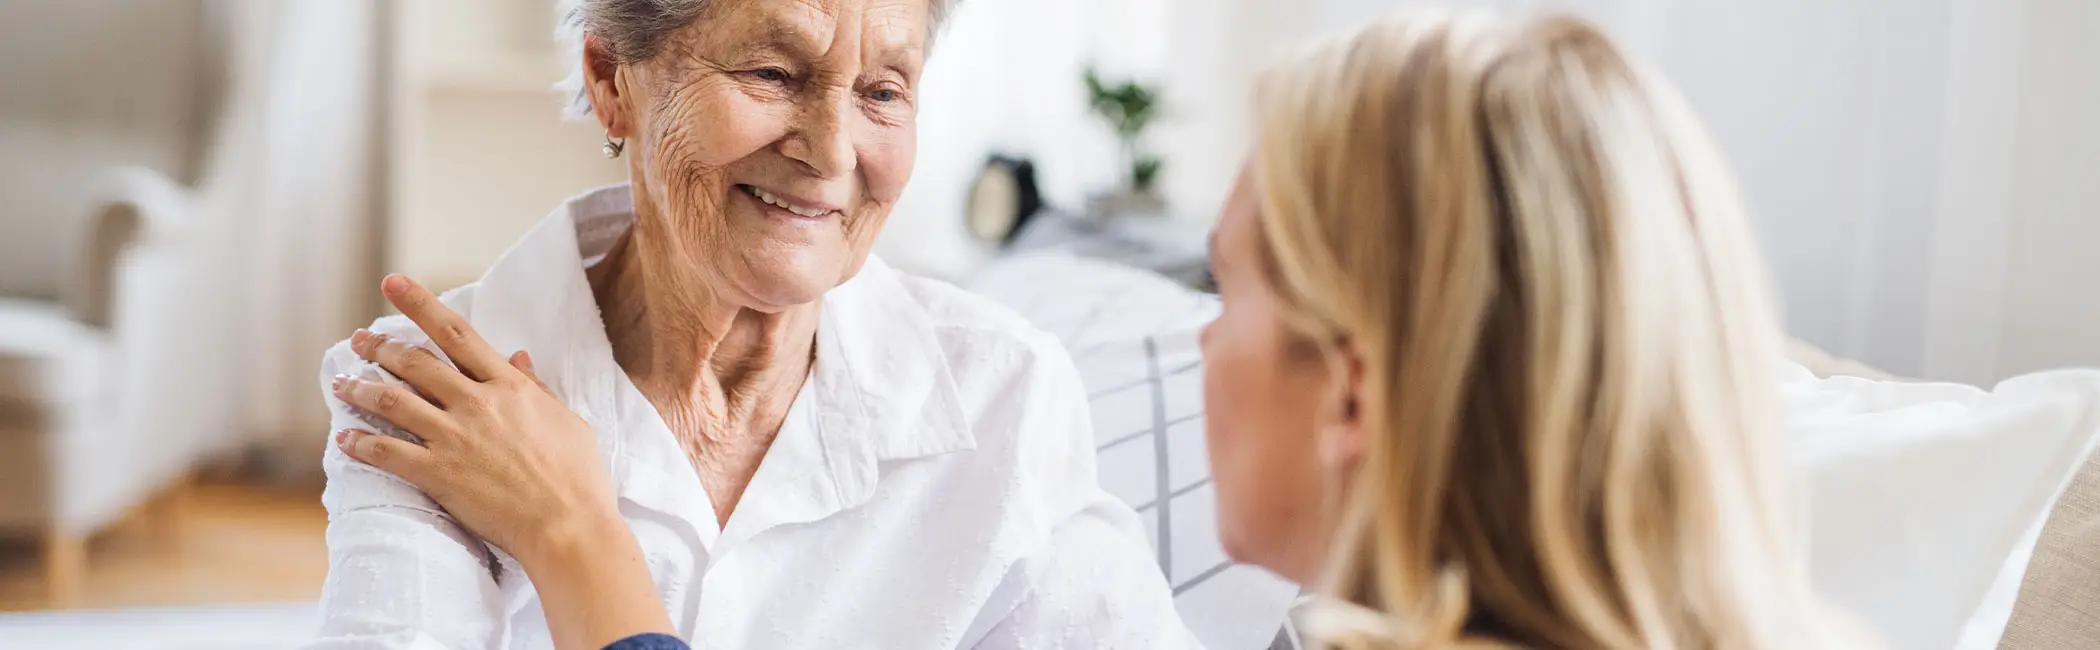 Promoting dignity in home care